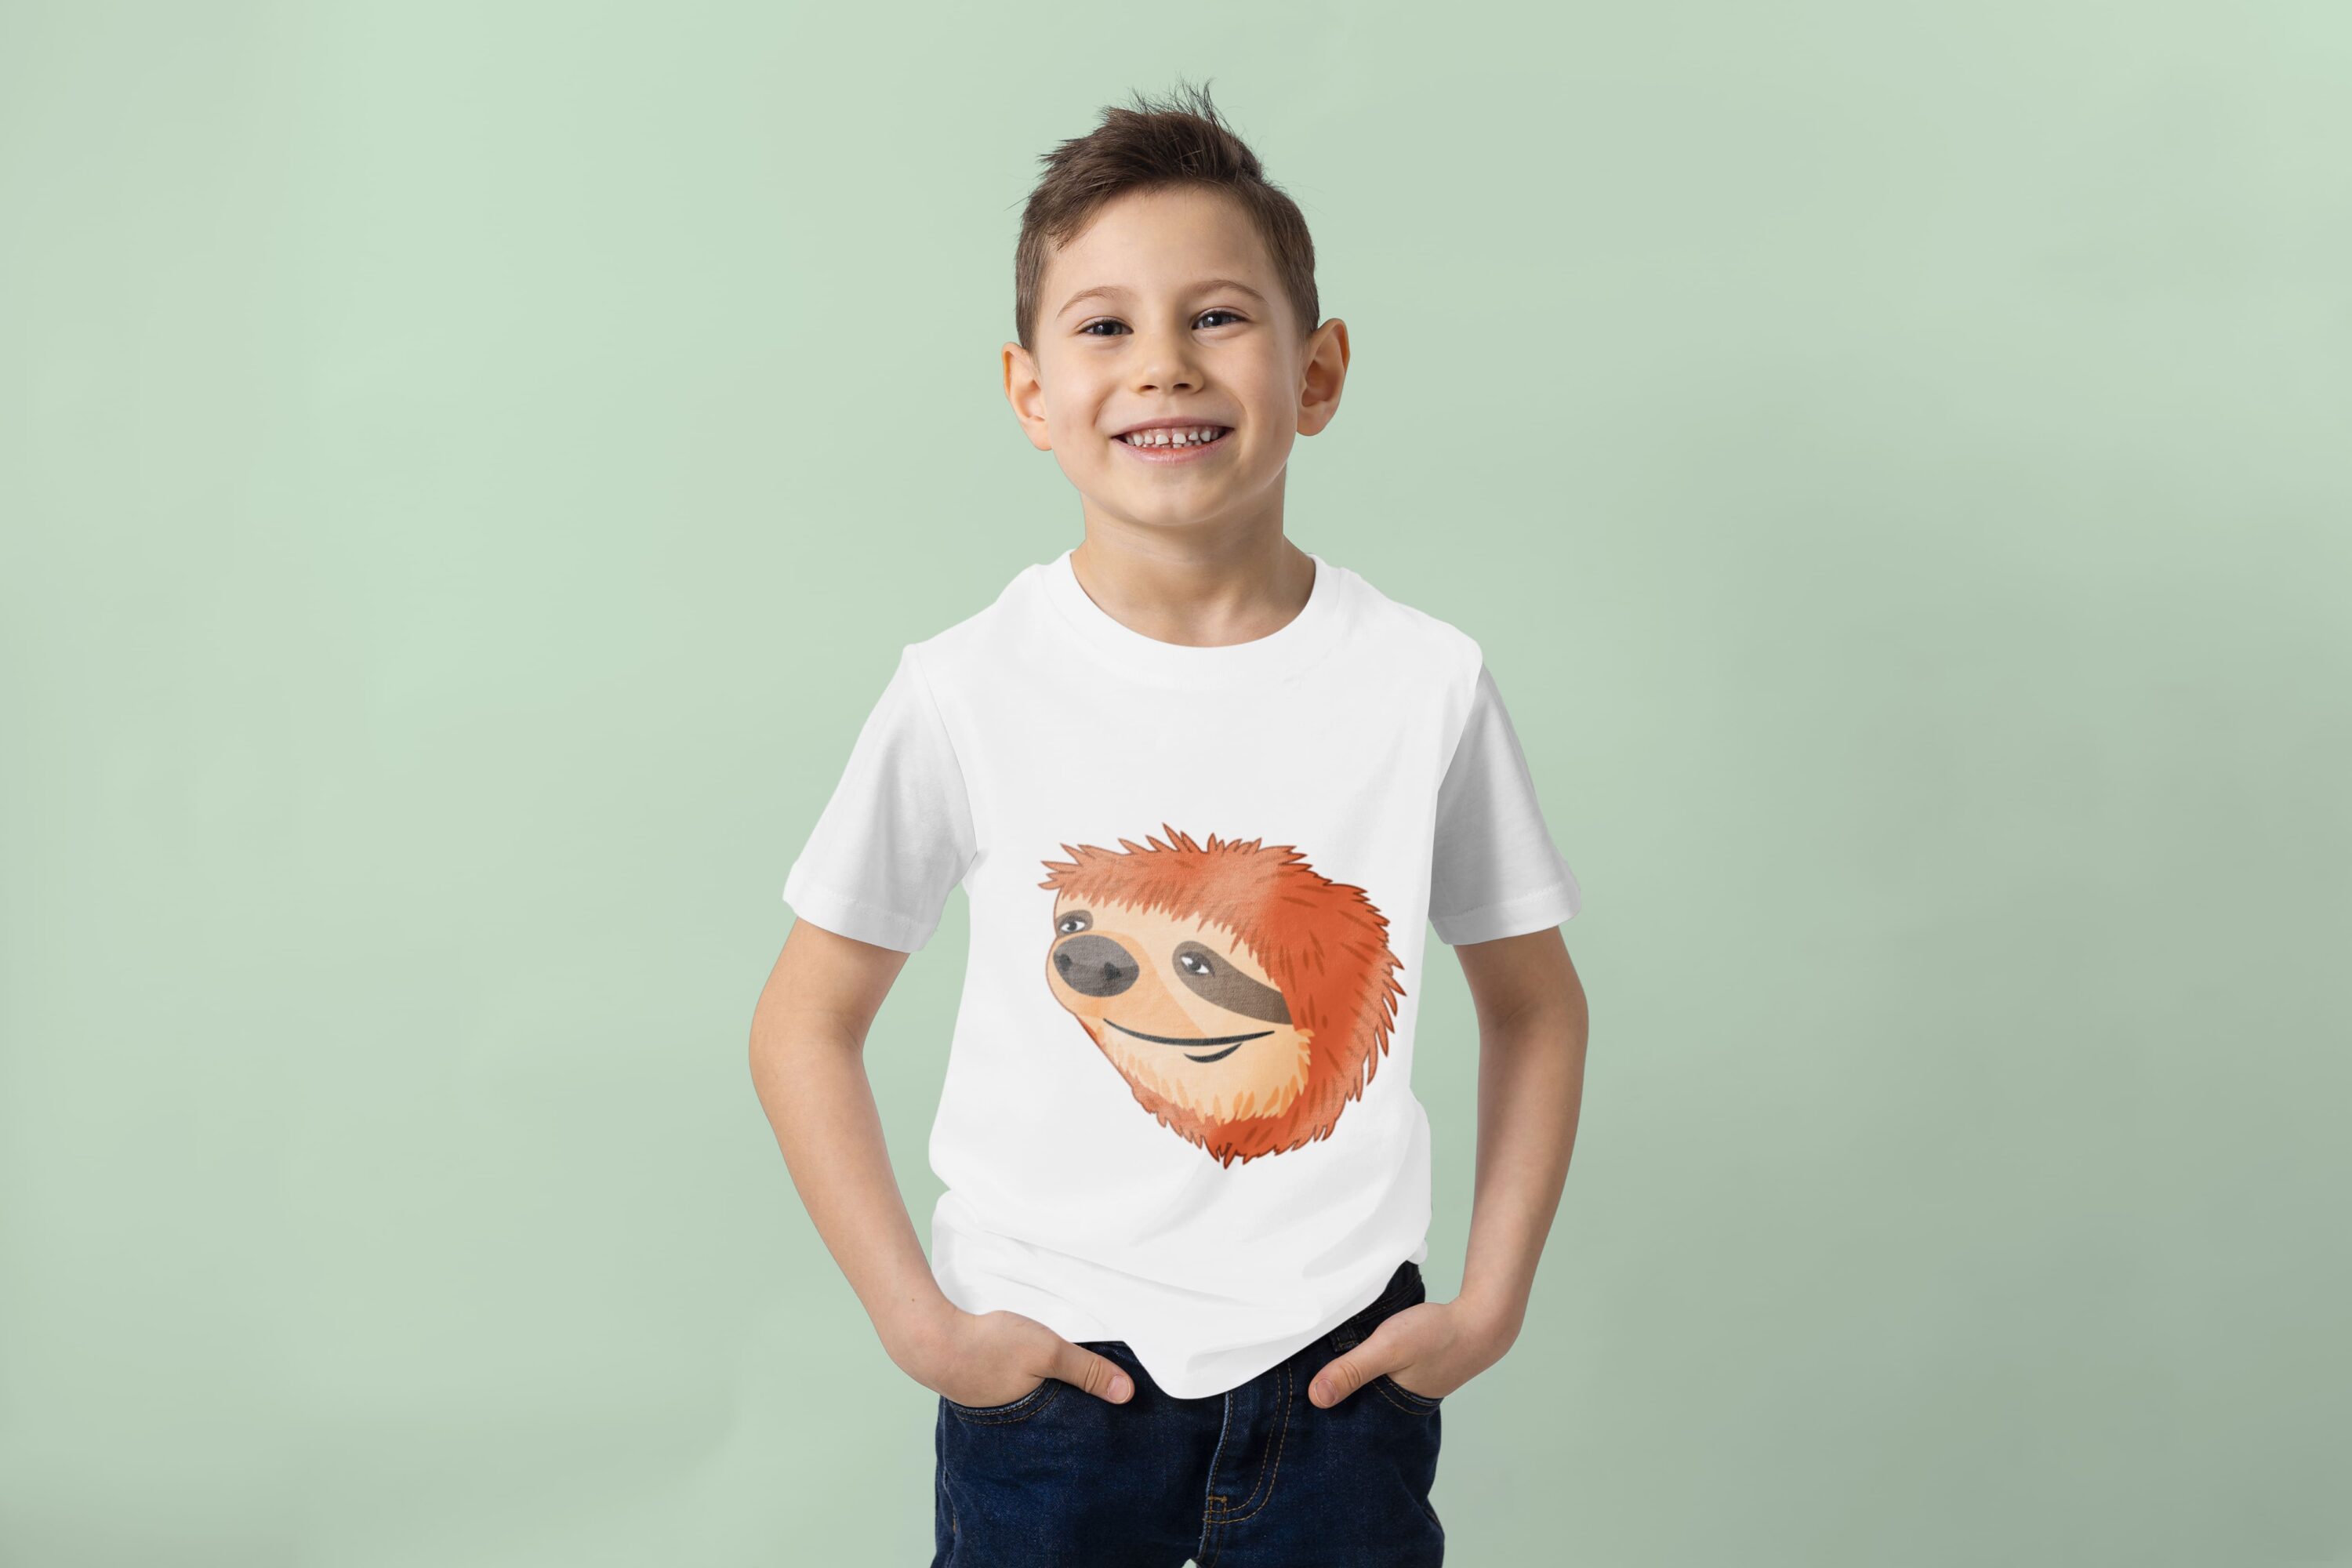 A little boy in a white t-shirt with the image of a sloth.